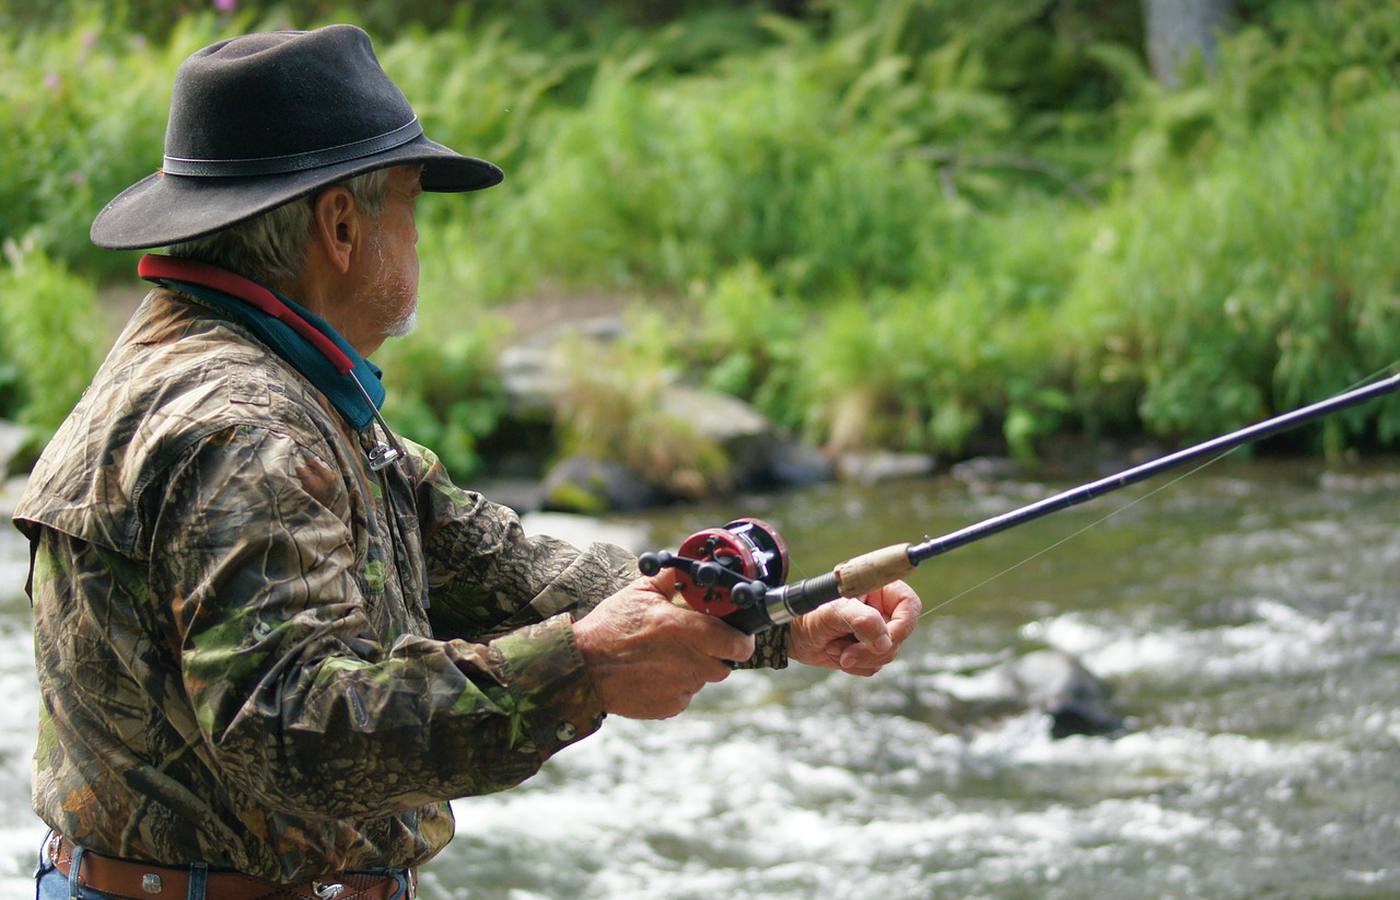 The Most Expensive Fly Rod Money Can Buy: Who Really Needs It?